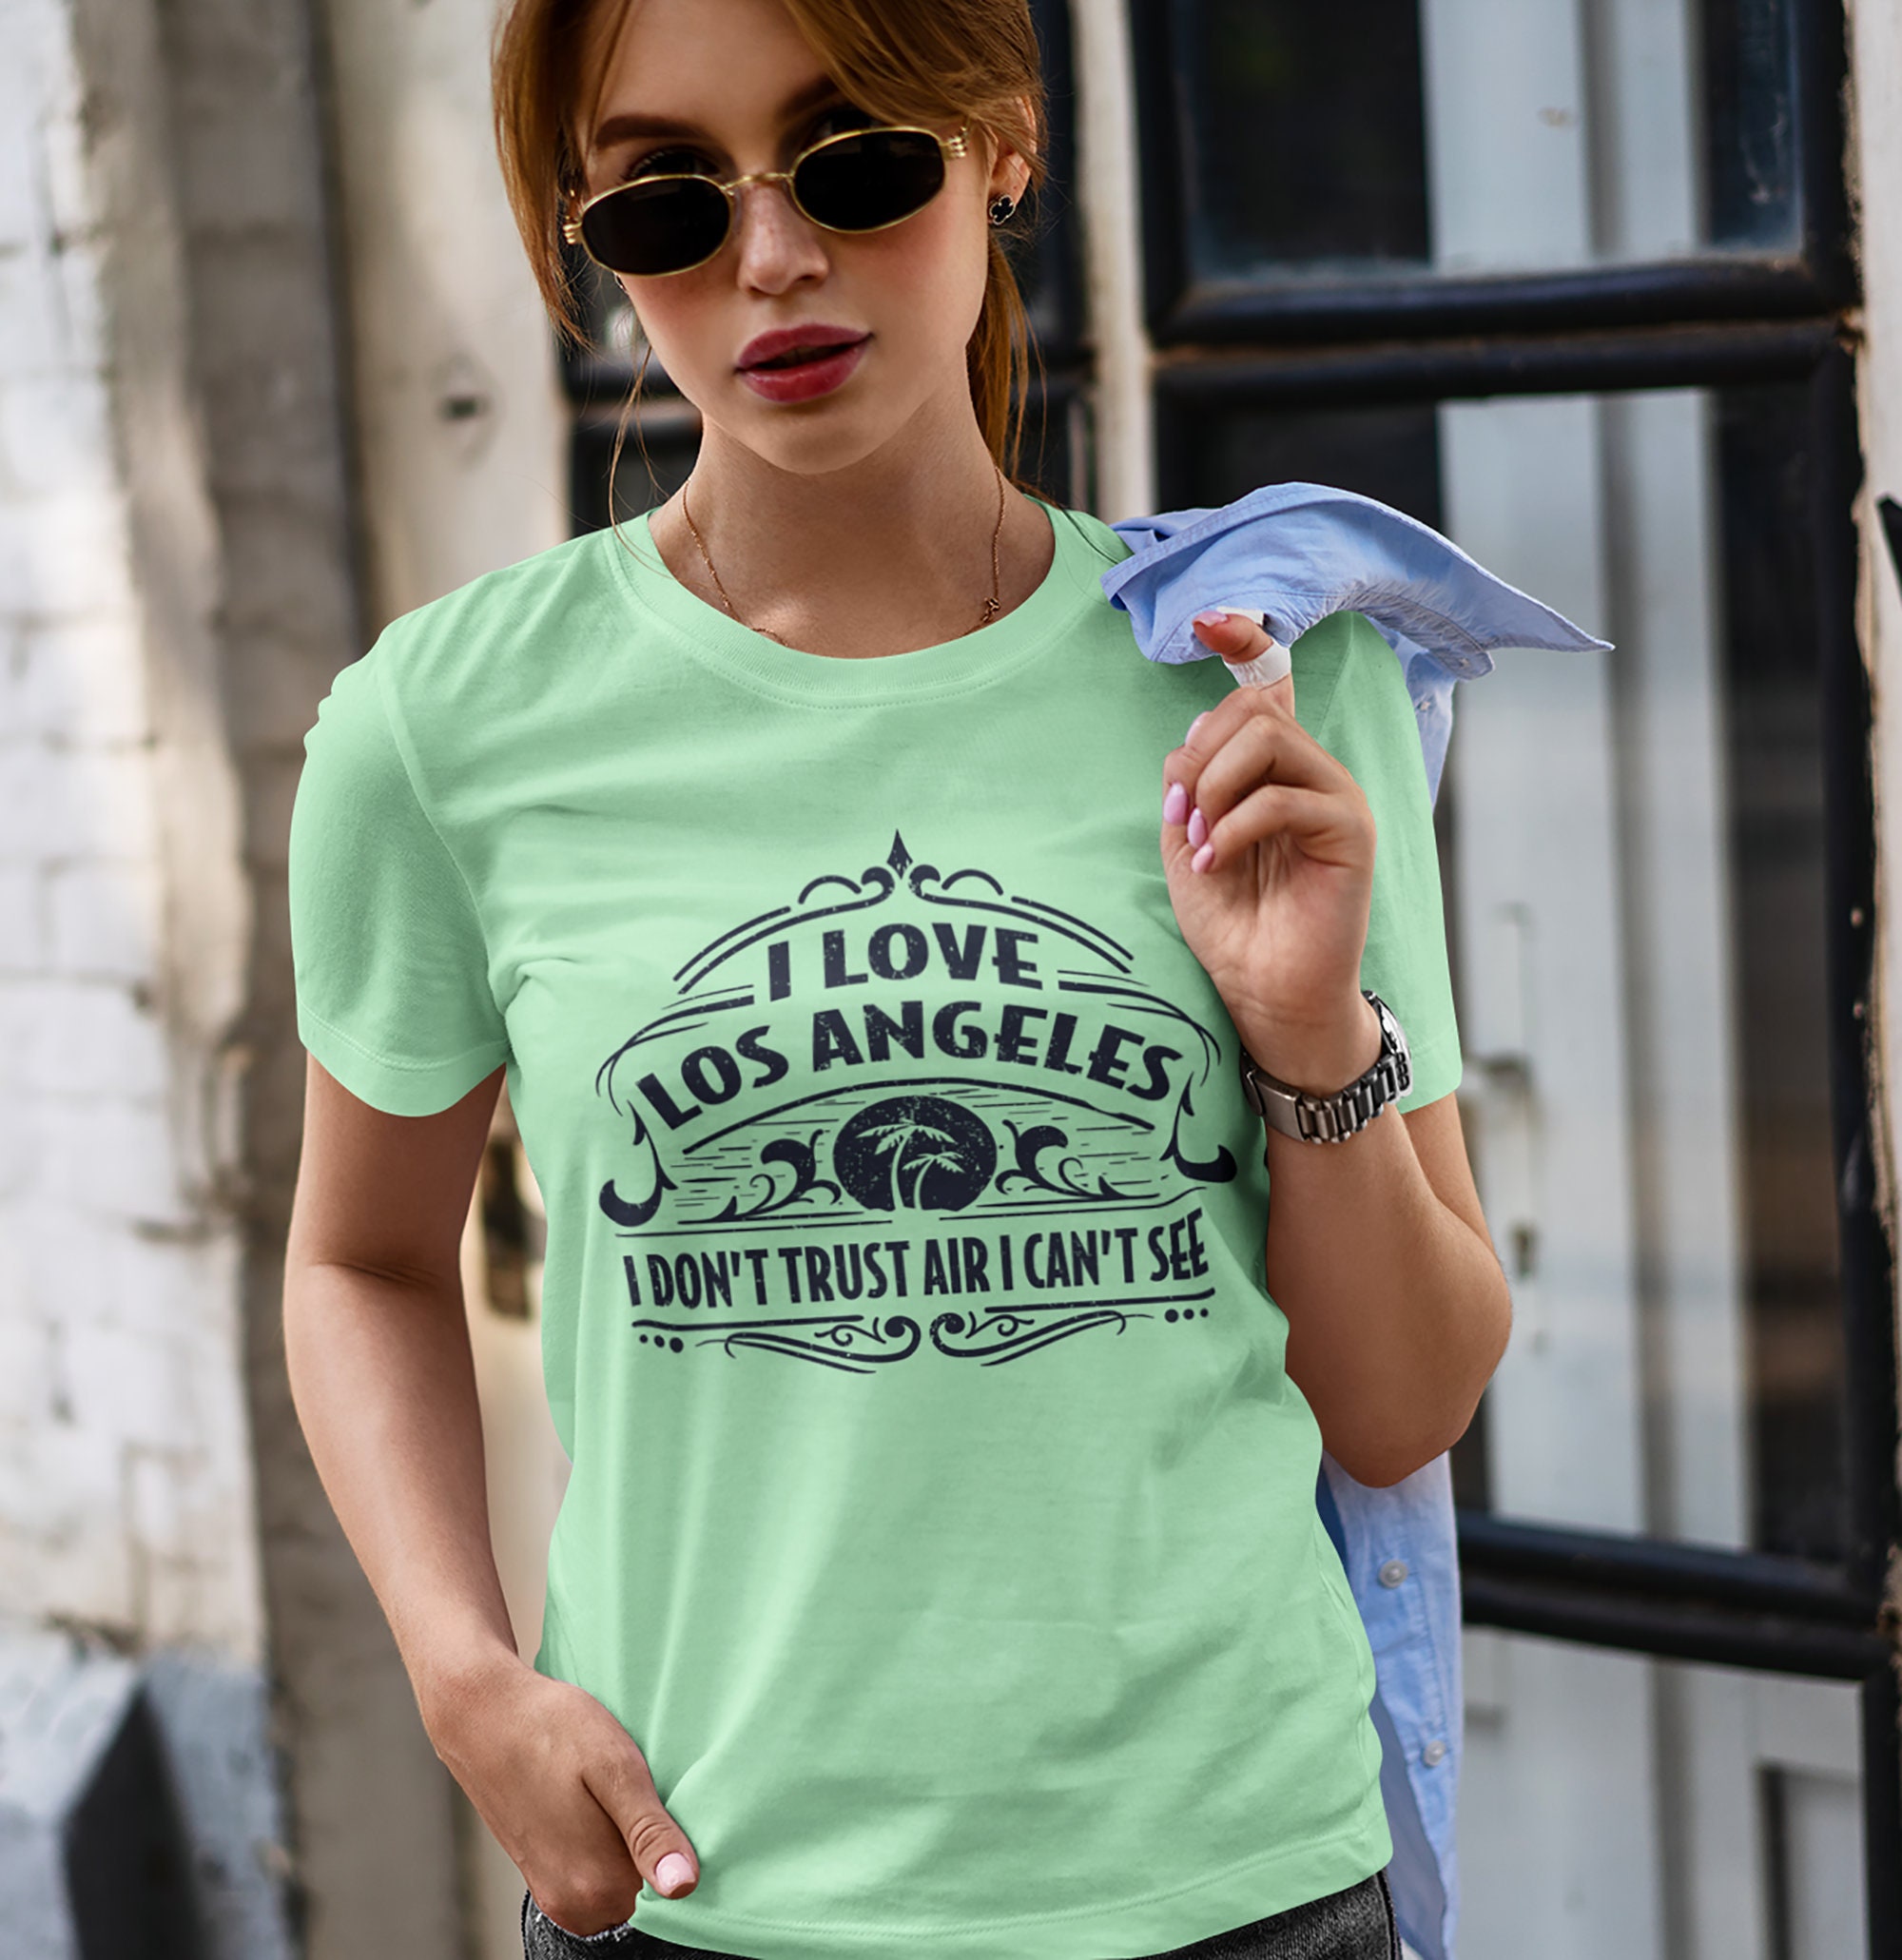 TAKEYAL Los Angeles Tshirts Shirts for Women California Letter Print Short  Sleeve Graphic Tee Tops (Blue, S) at  Women's Clothing store